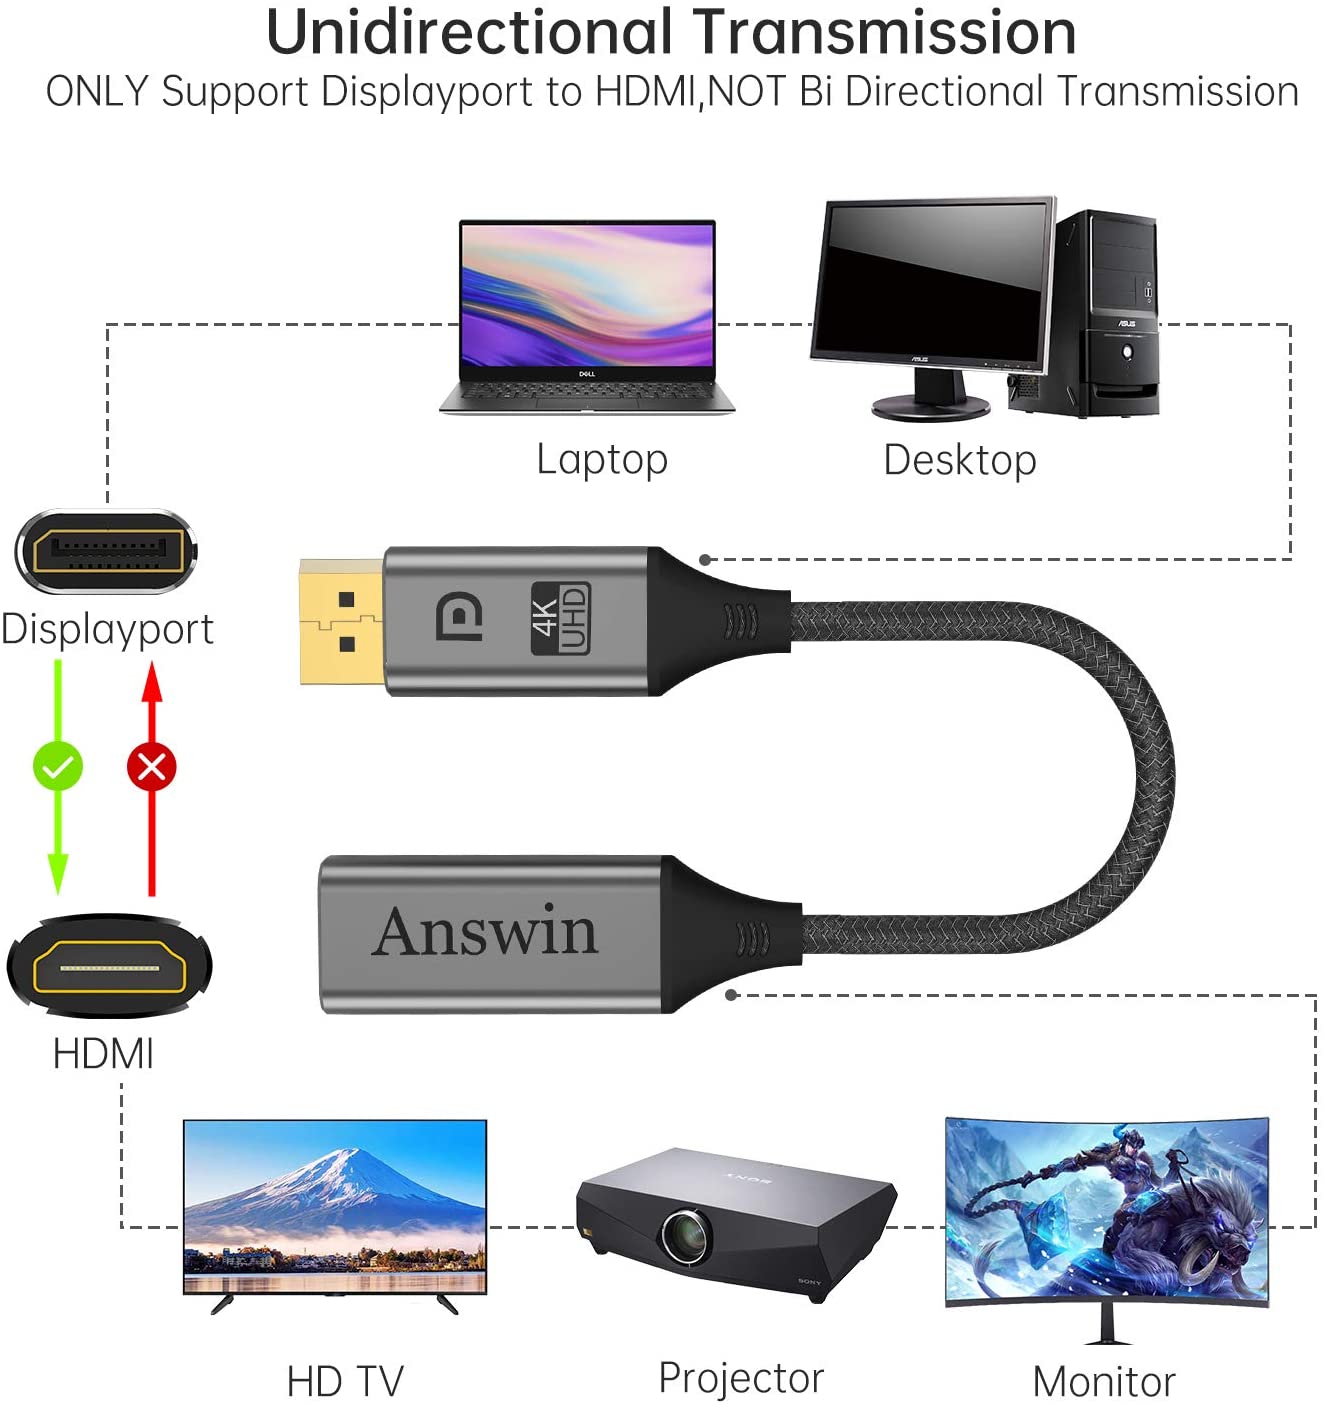 Answin 4K Display Port DP to HDMI for HP Dell Lenovo, HDTV, Projector, Desktop. (2 pack) (NC)